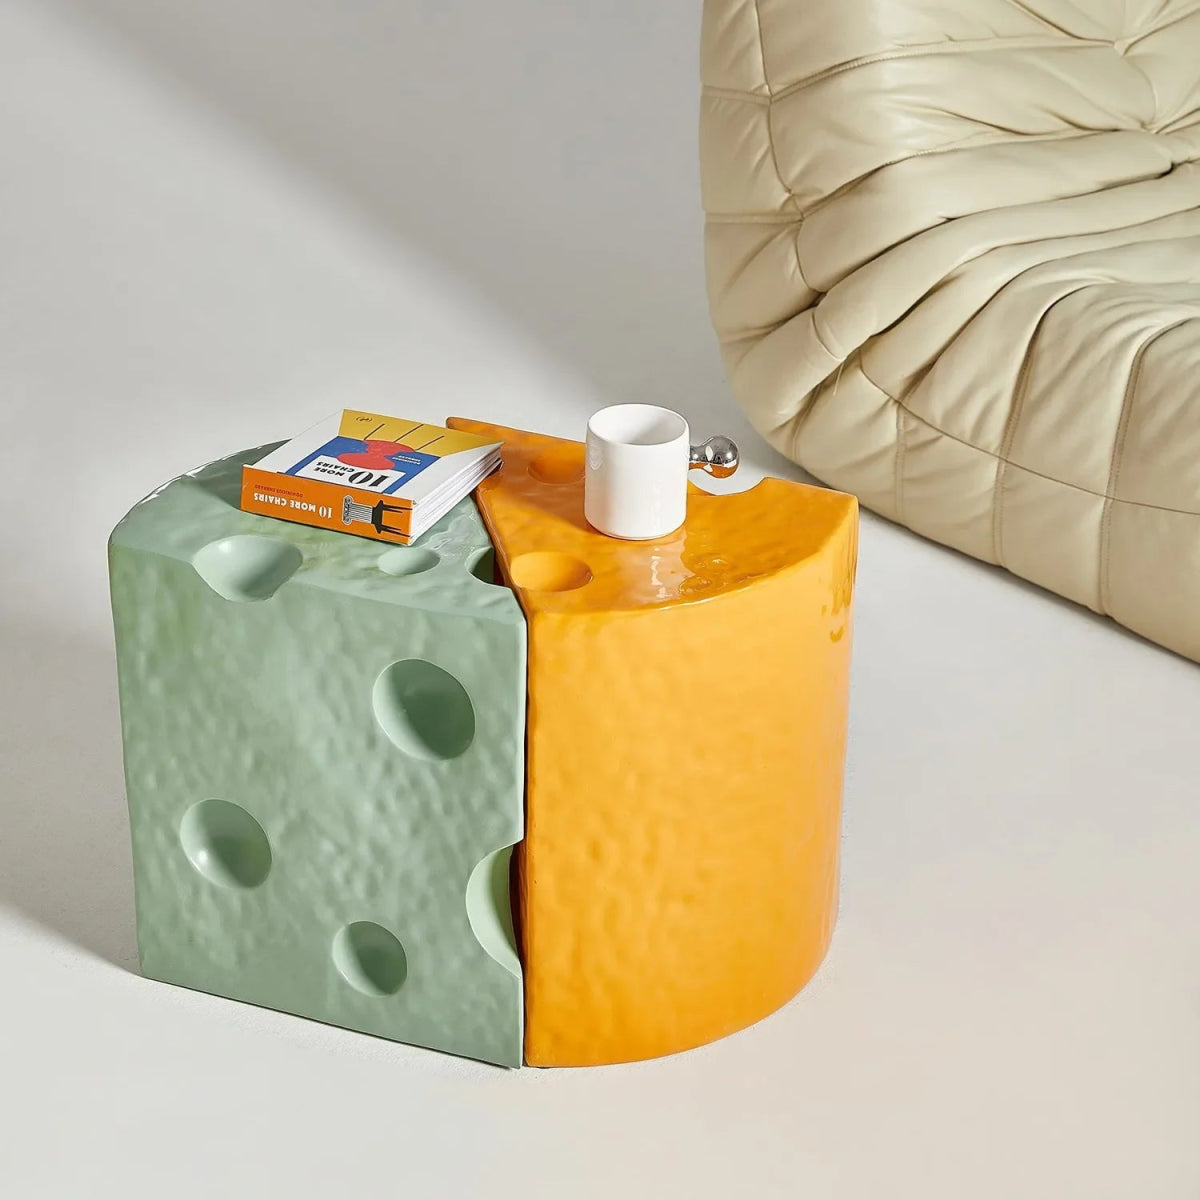 Cheesy Delight Resin Ottoman Stool - Chairs & Stools - Scribble Snacks